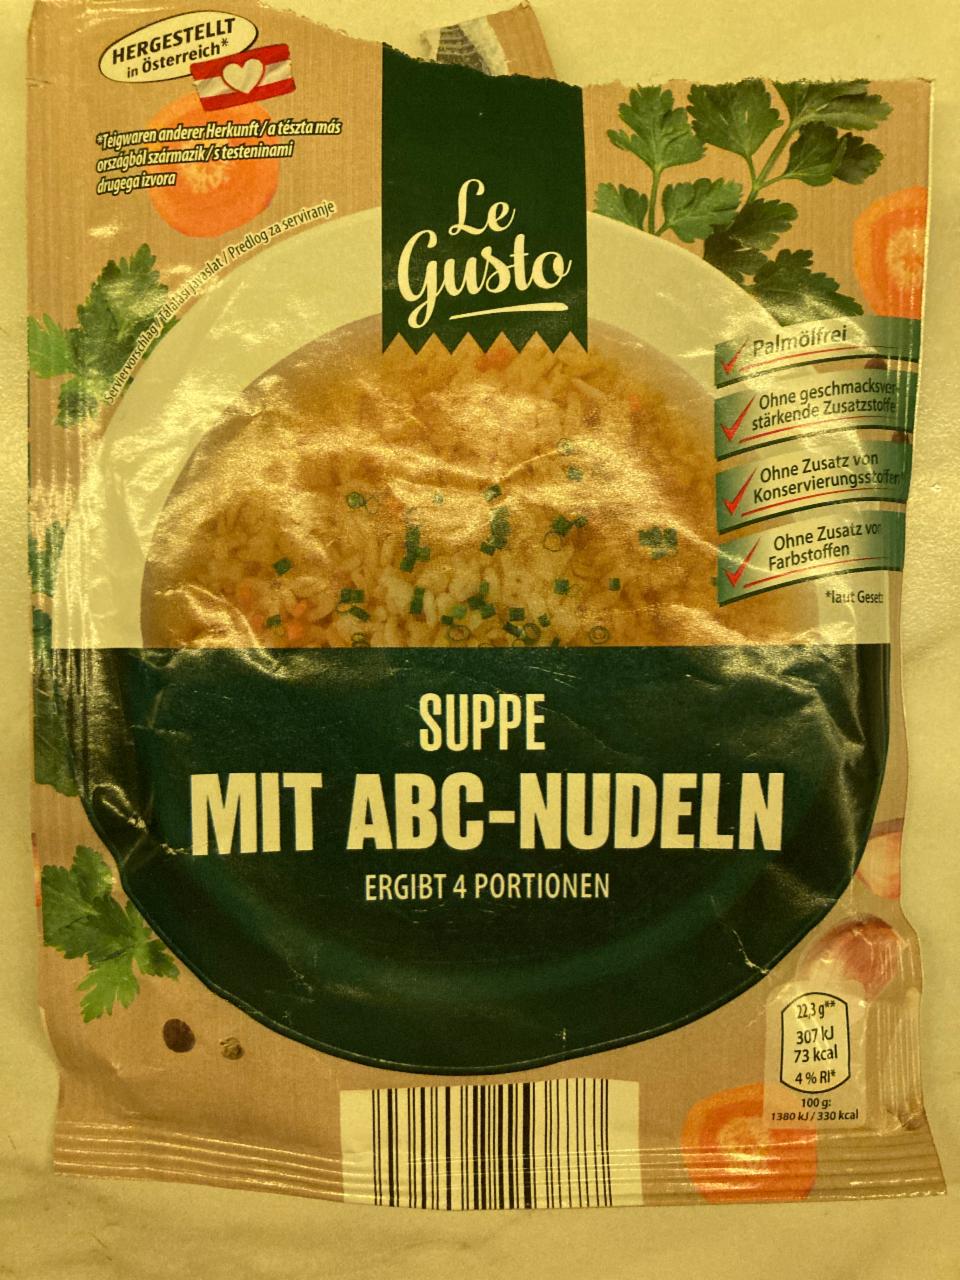 Fotografie - Suppe mit ABC-Nudeln Le Gusto